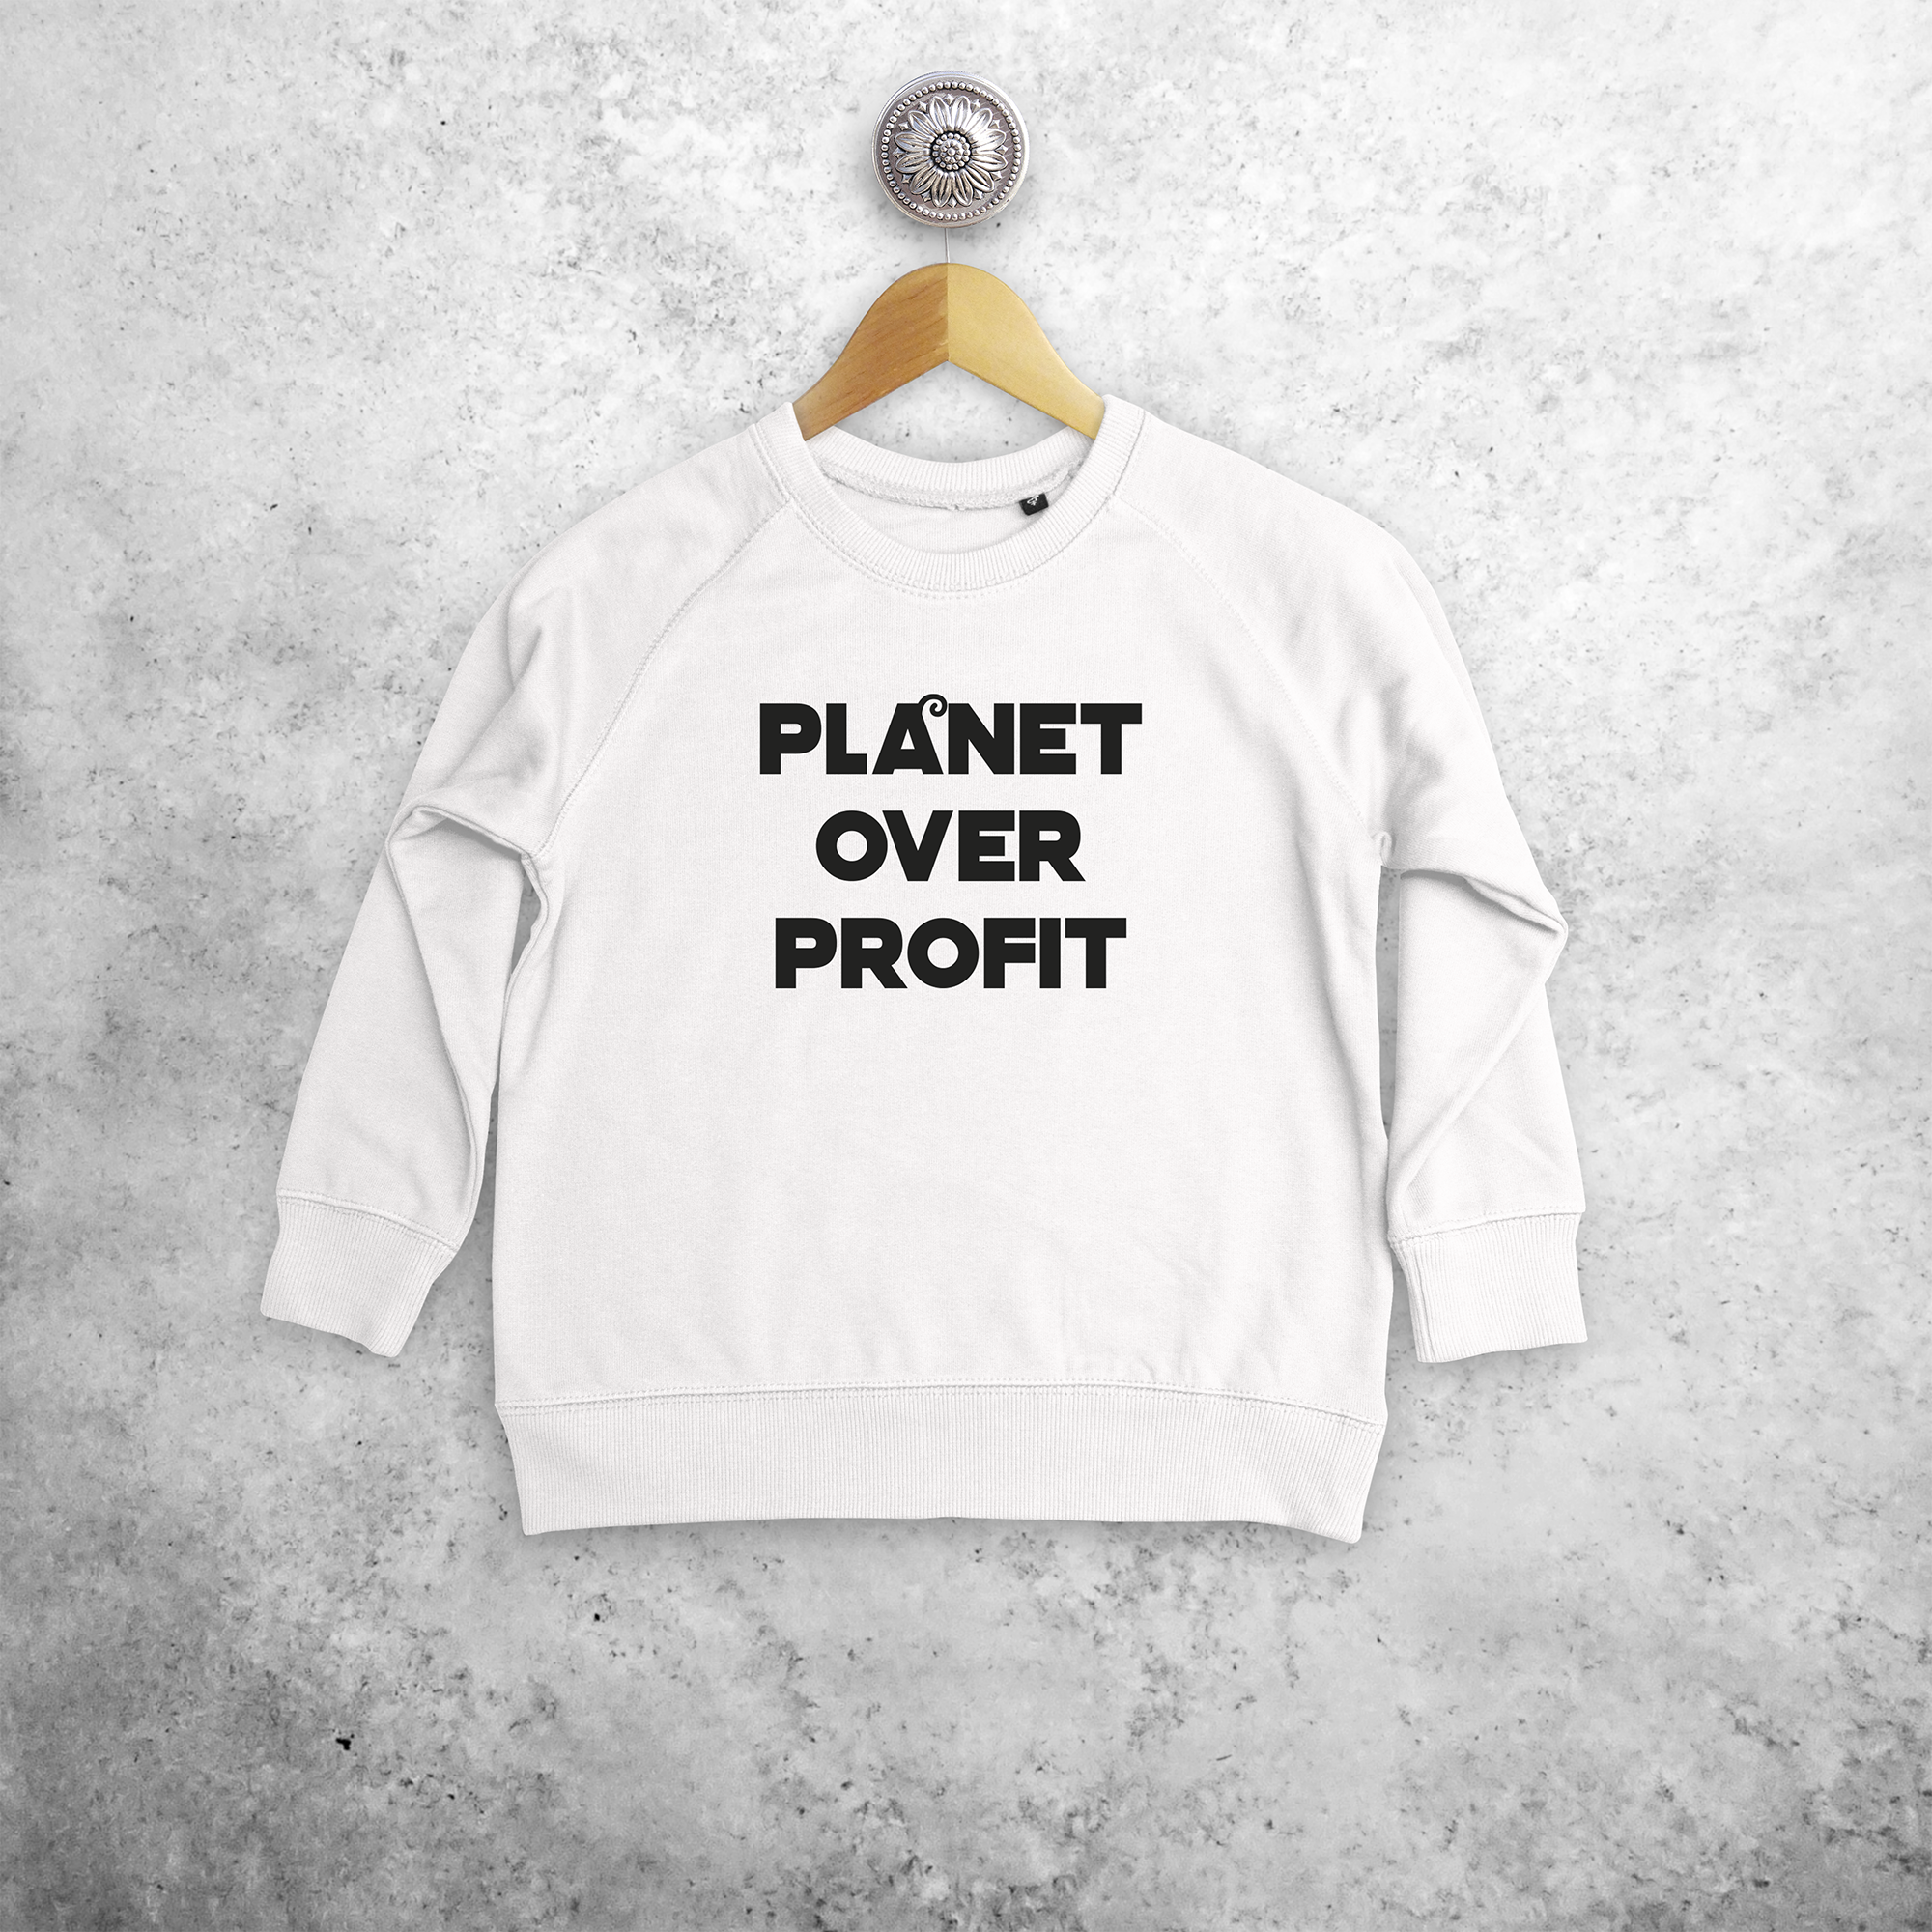 'Planet over profit' kids sweater